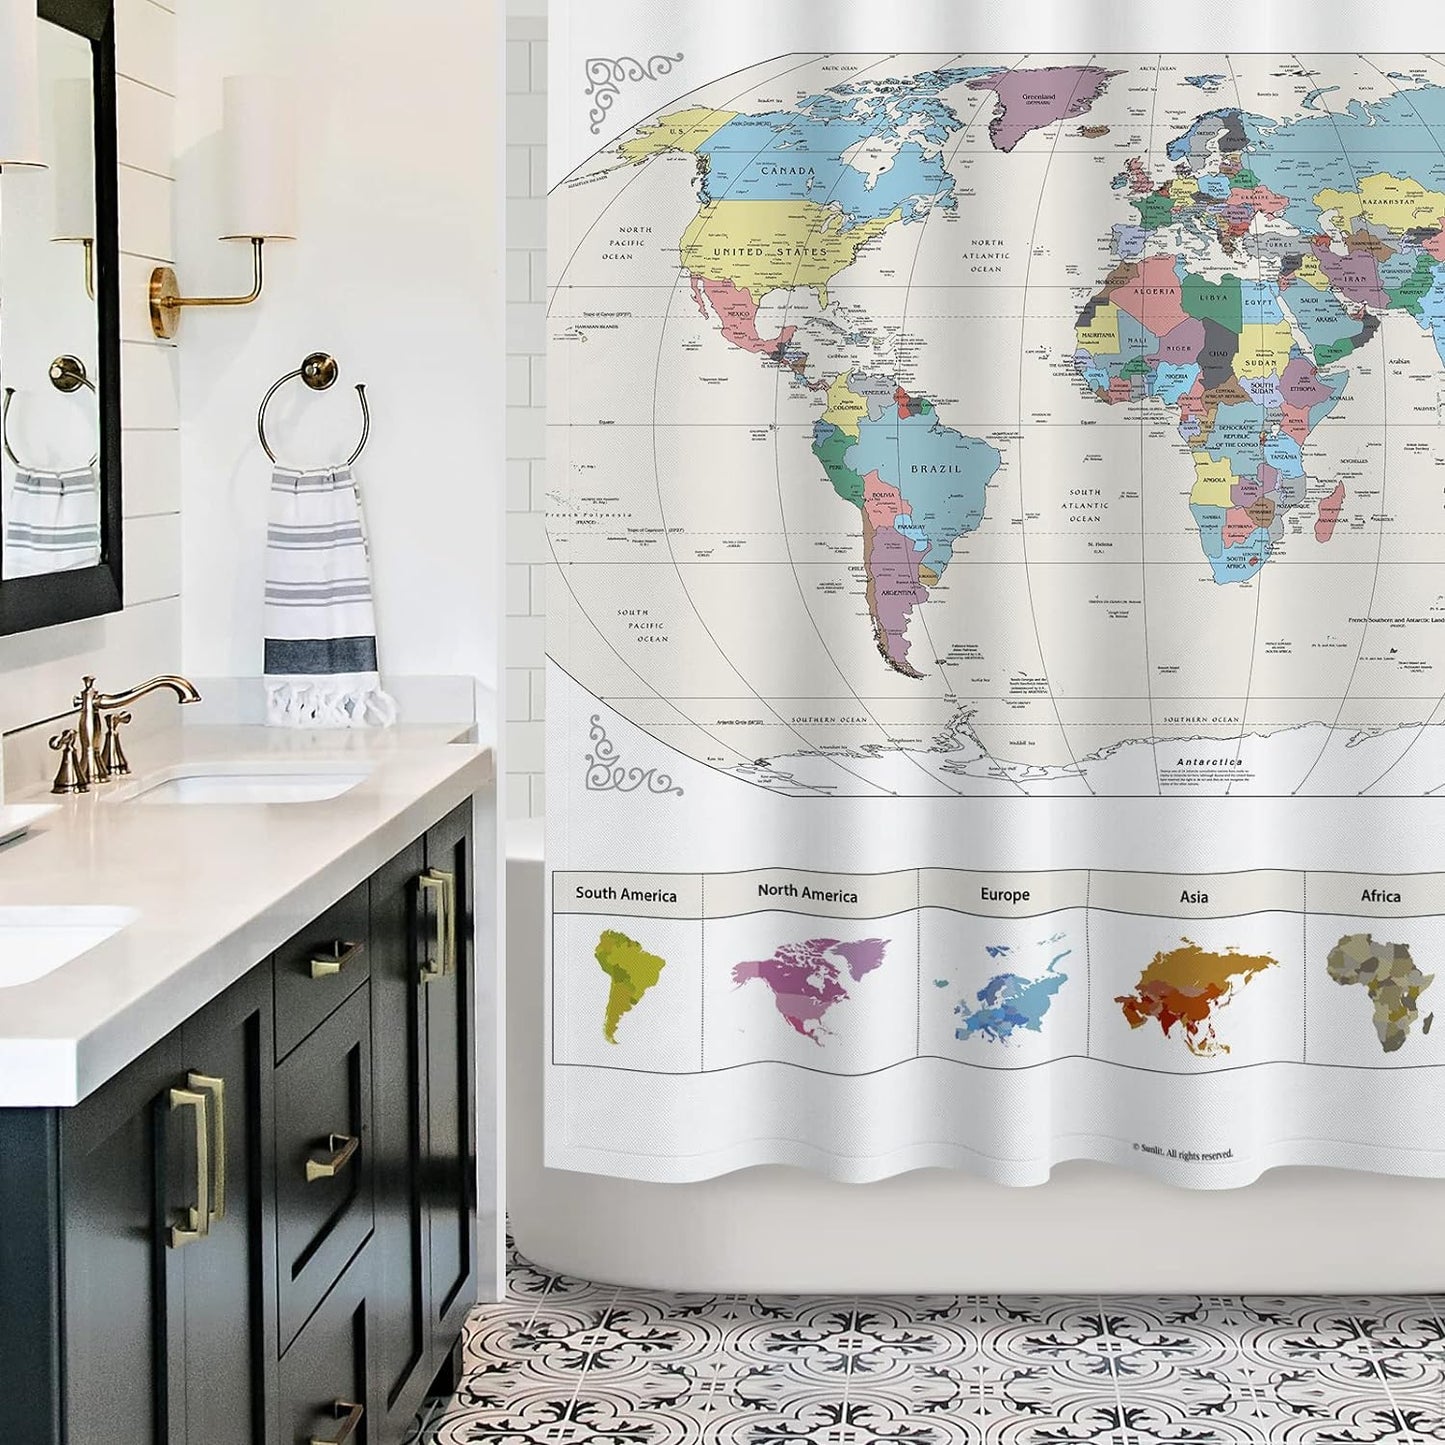 New! Map of The World with Detailed Major Cities. PVC Free, Non-Toxic and Odorless Water Repellent Fabric Shower Curtains - Large Home Decor Wall Map